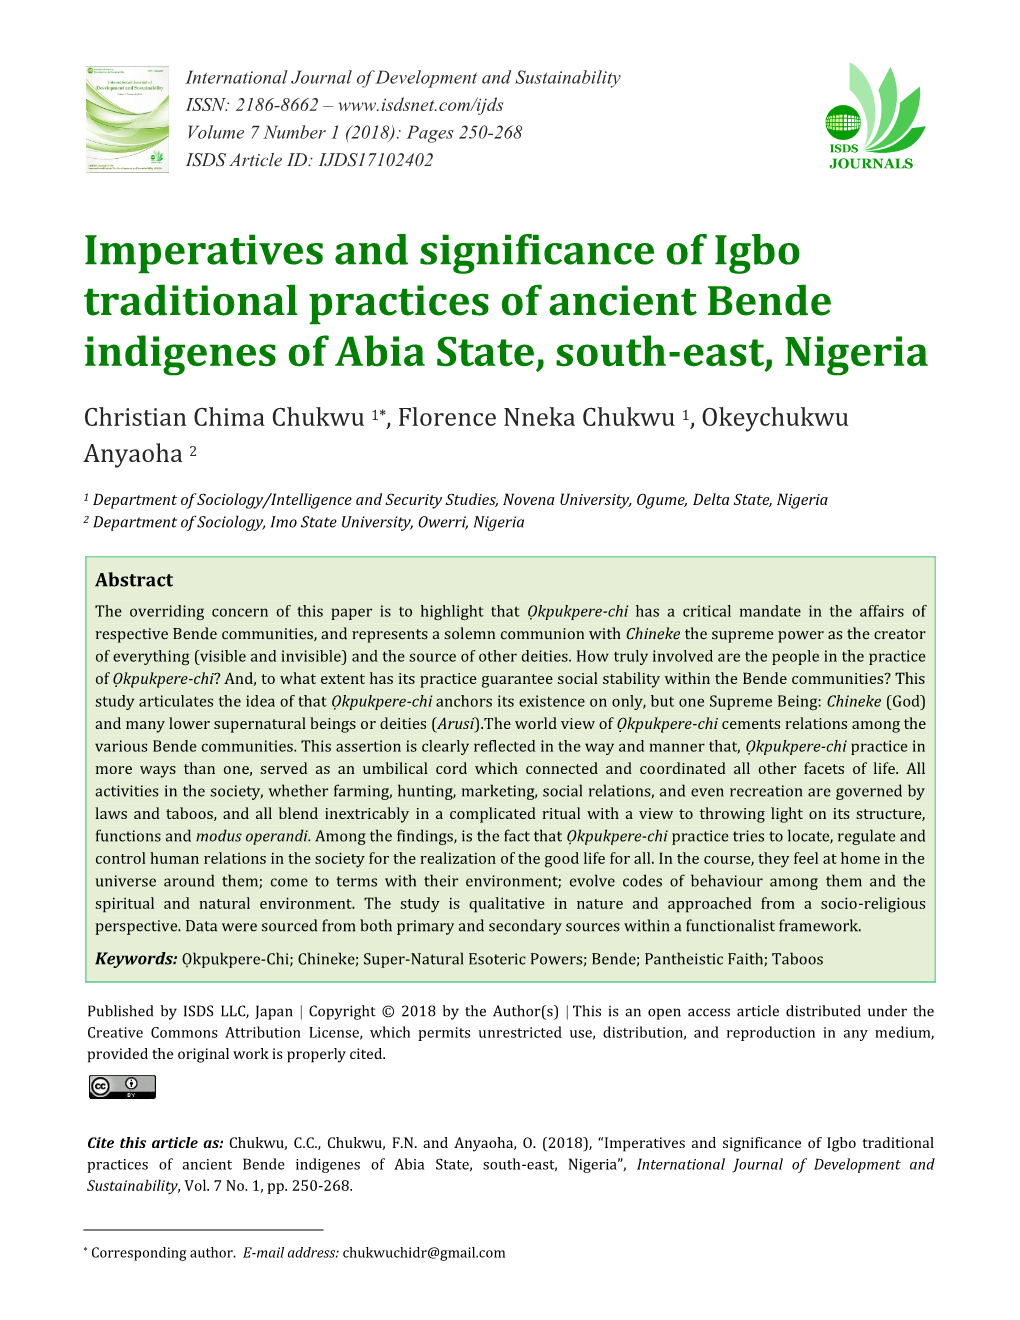 Imperatives and Significance of Igbo Traditional Practices of Ancient Bende Indigenes of Abia State, South-East, Nigeria